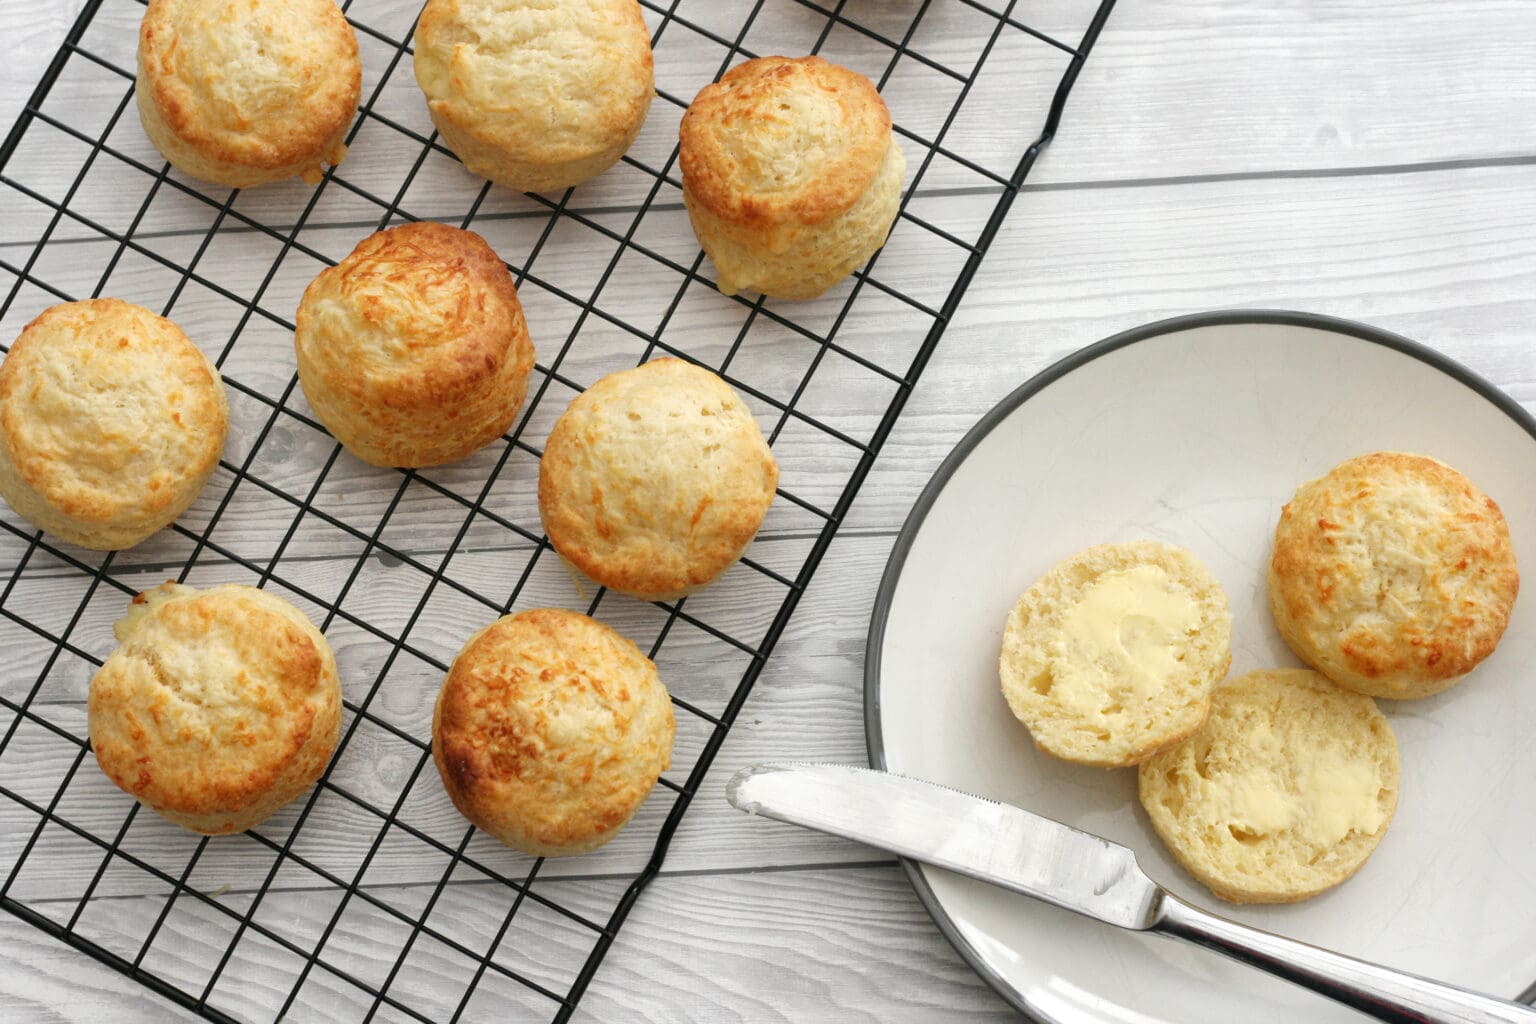 This easy cheese scone recipe from Mary berry is a great, simple bake ...